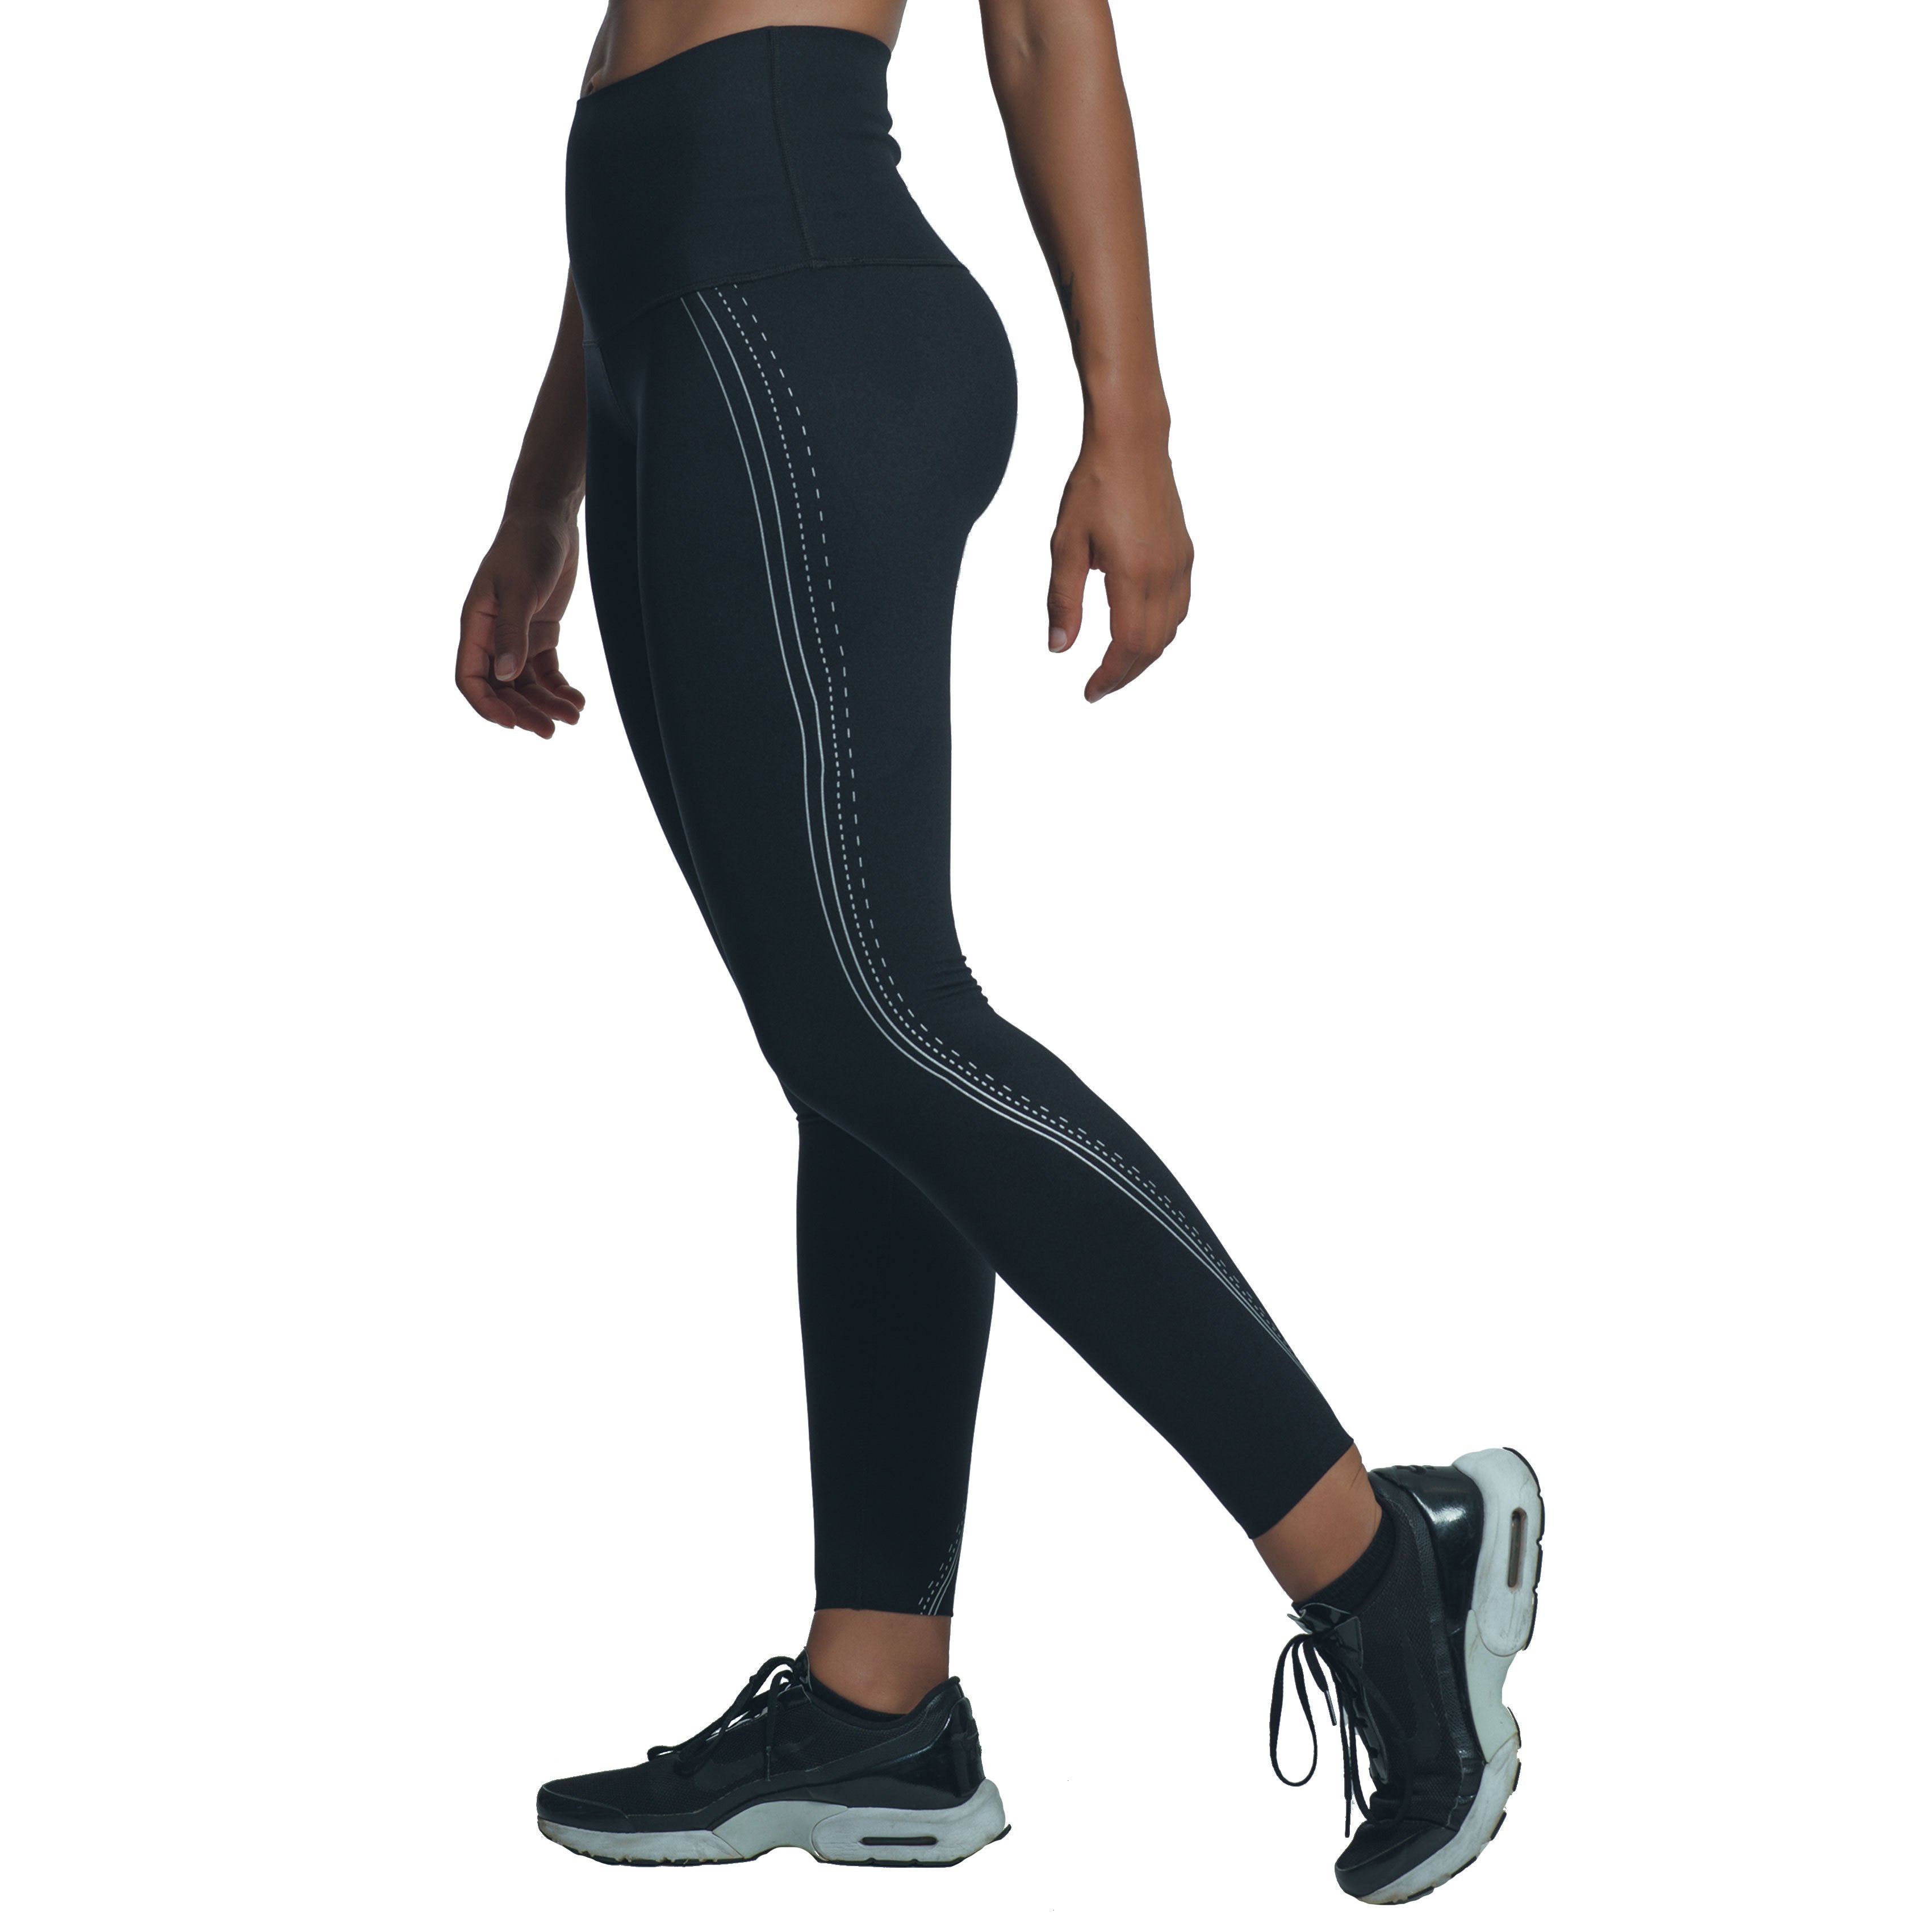 https://www.gymaesthetics.com/cdn/shop/products/high-waist-supportive-compression-leggings-for-women-in-black-19ssf042lggblk-2b_1e2fbc11-3e0d-4668-9a1b-b05a82a64fb4.jpg?v=1634613274